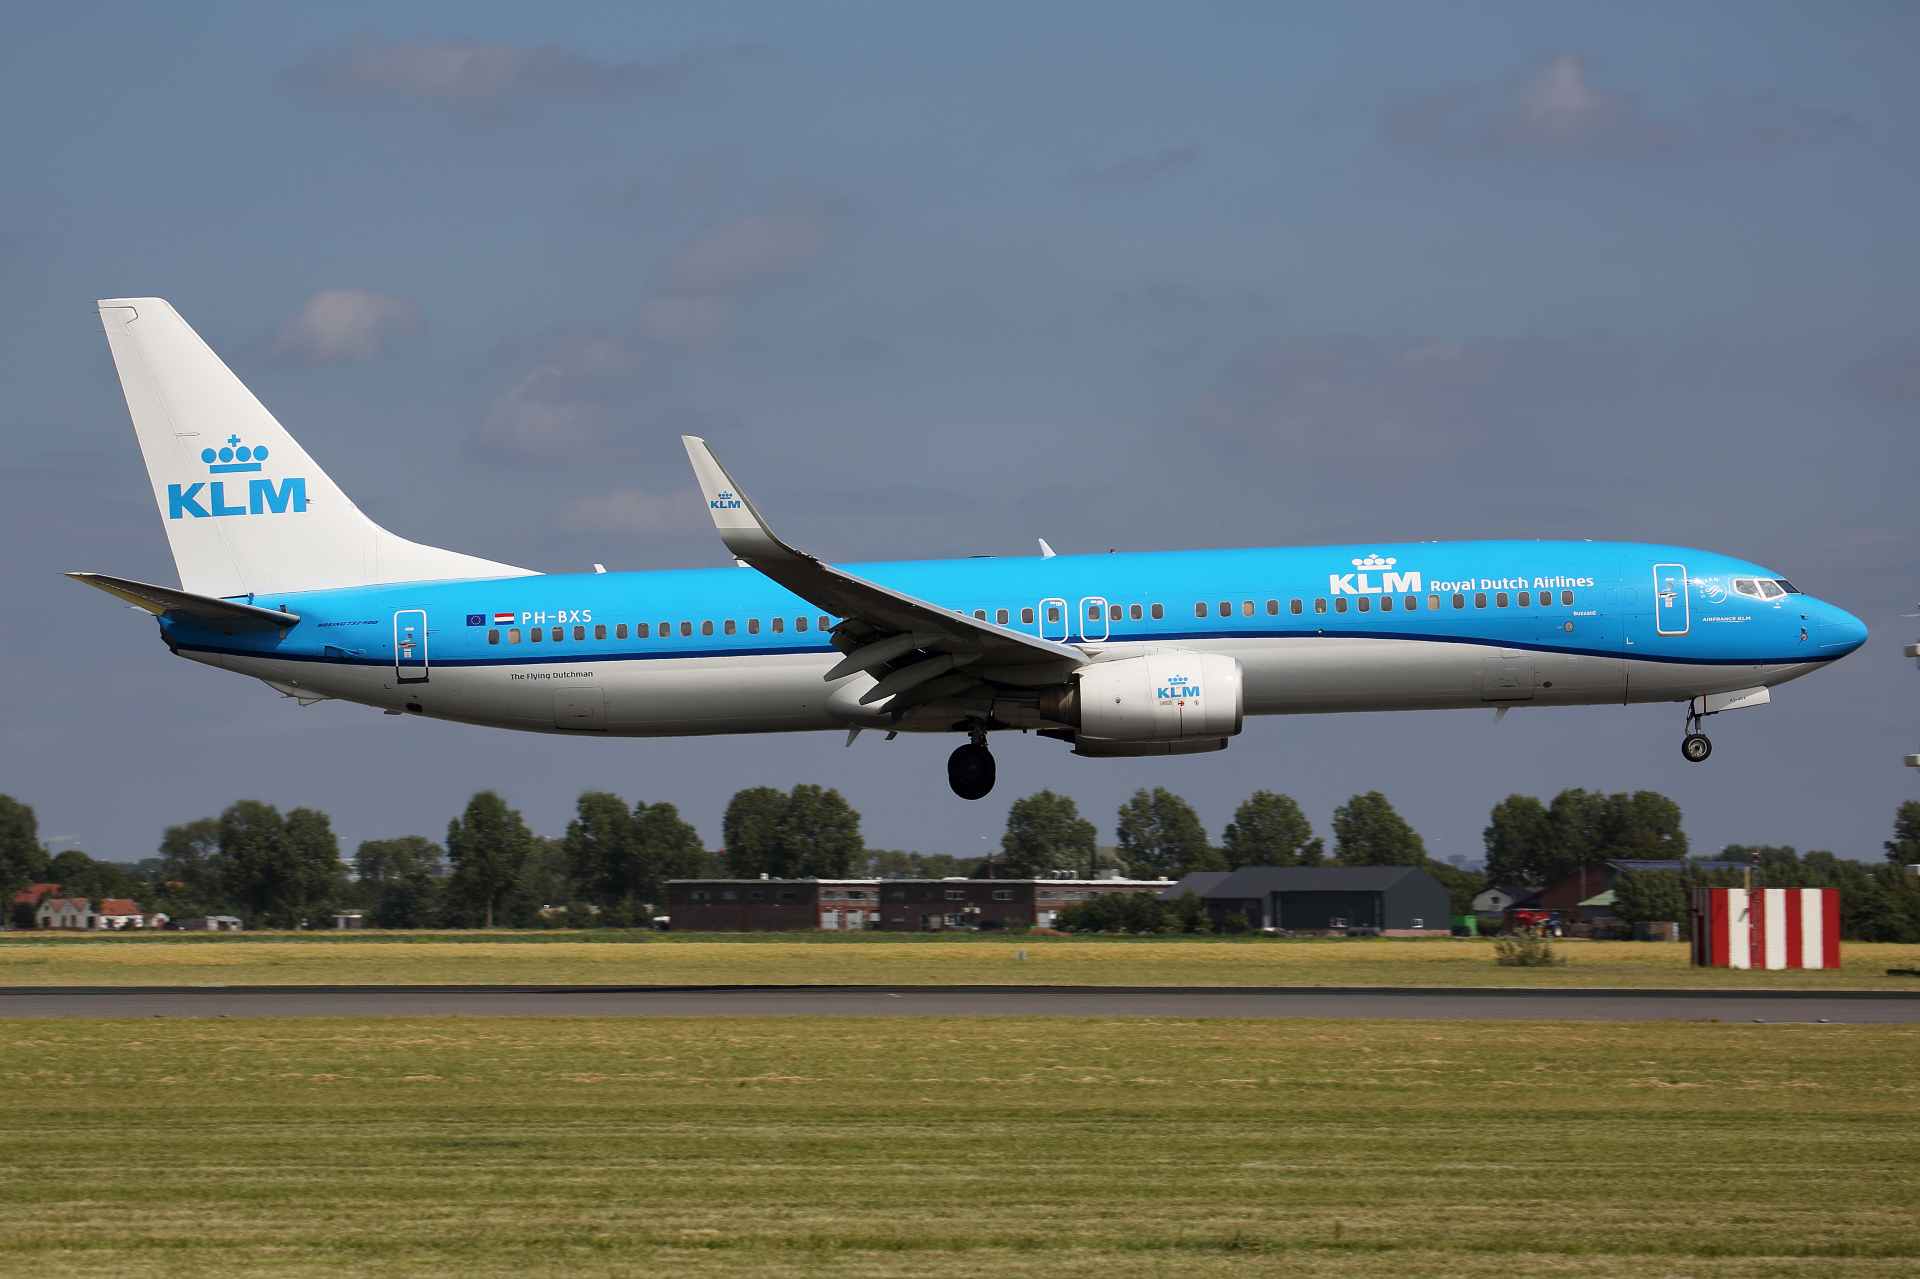 PH-BXS (Aircraft » Schiphol Spotting » Boeing 737-900 » KLM Royal Dutch Airlines)